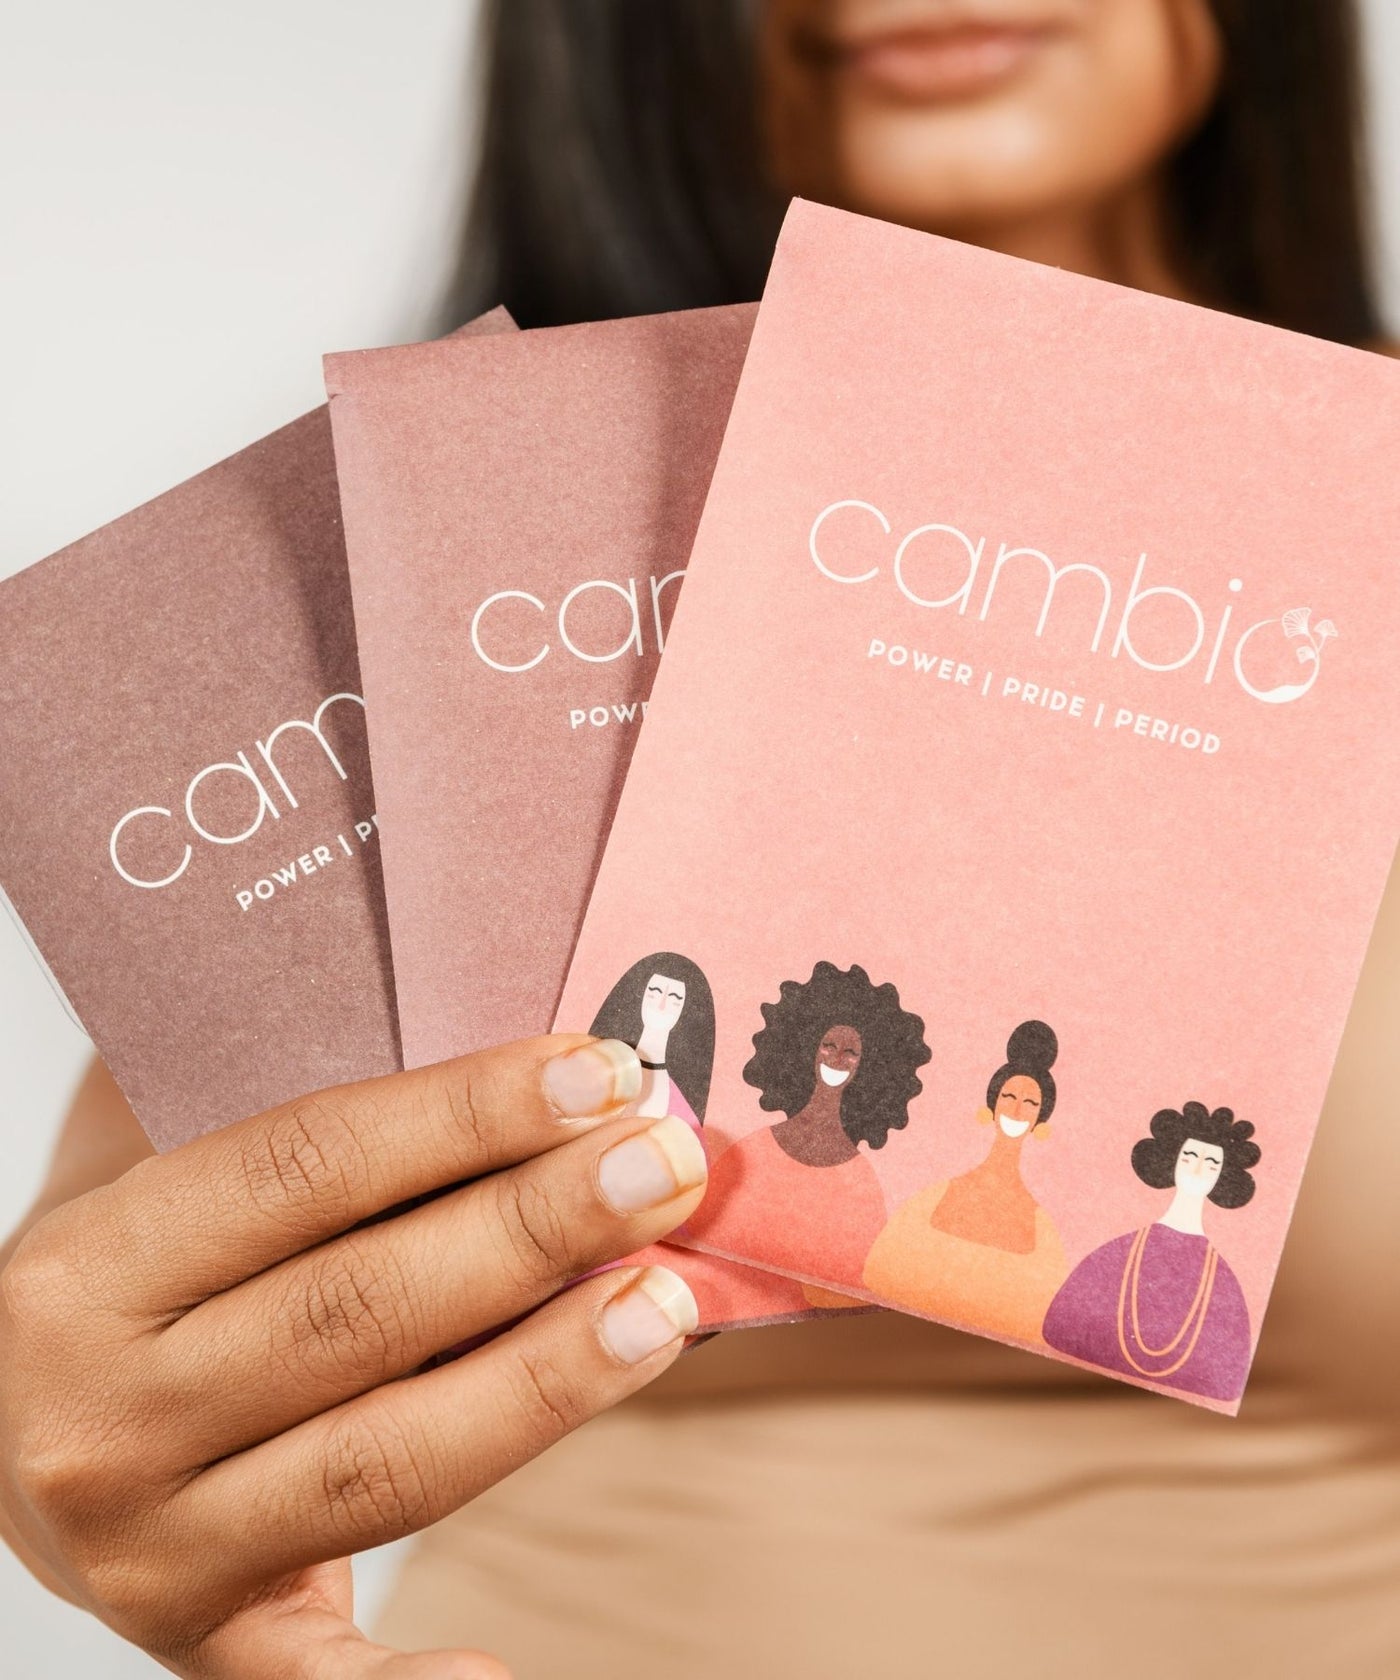 Cambio's sustainable paper disposal bags